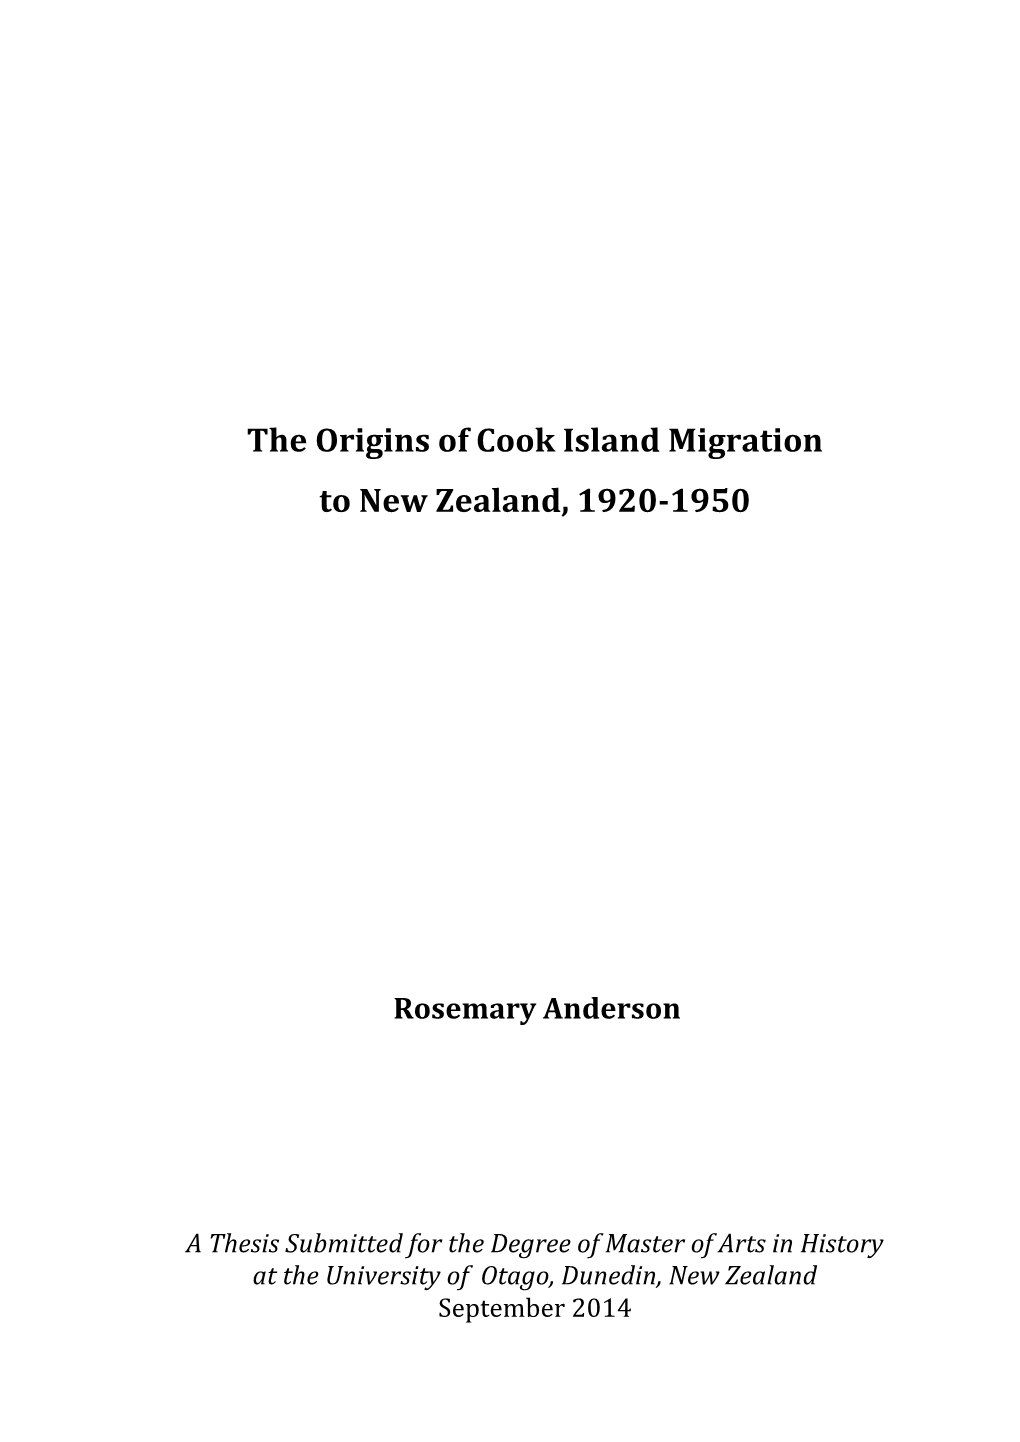 The Origins of Cook Island Migration to New Zealand, 1920-1950